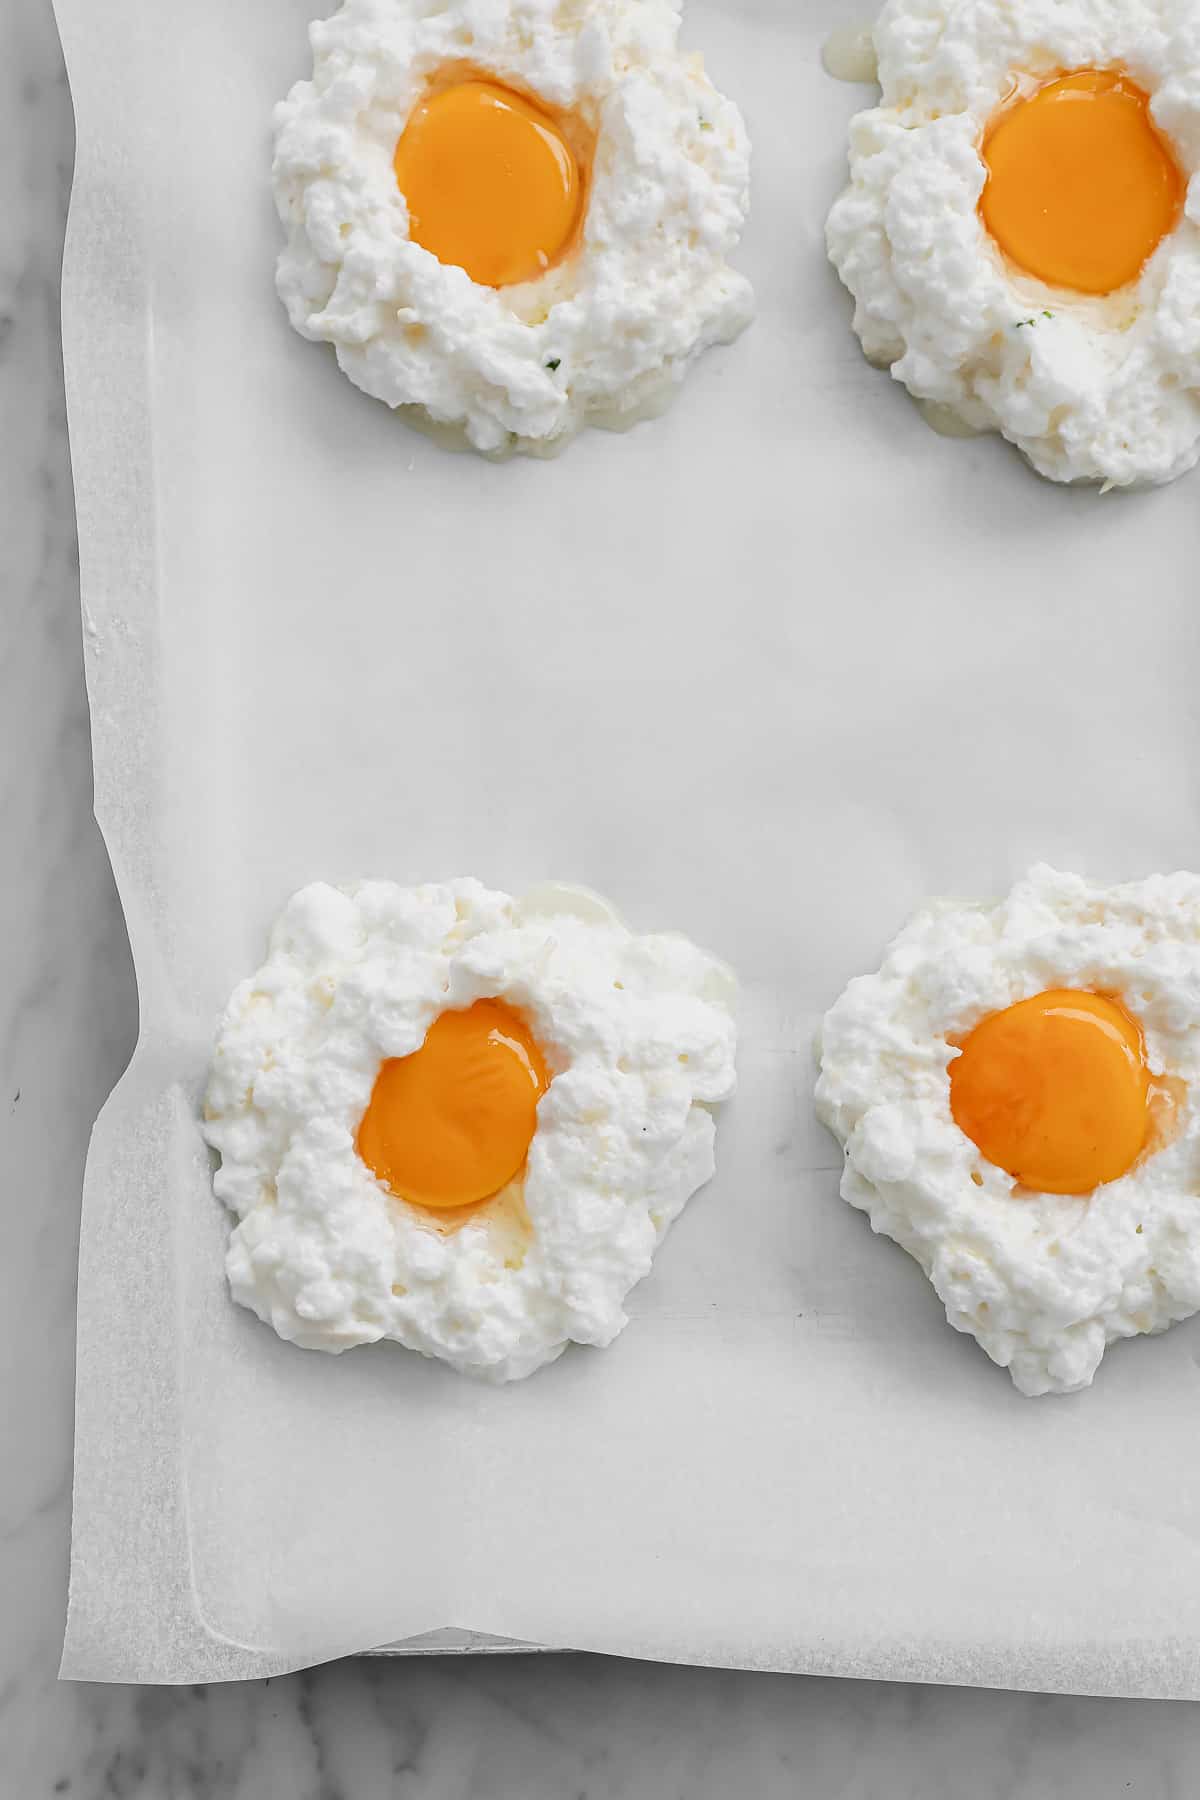 mounds of whipped egg whites, with a yolk placed in the center of each one, on a prepared baking sheet